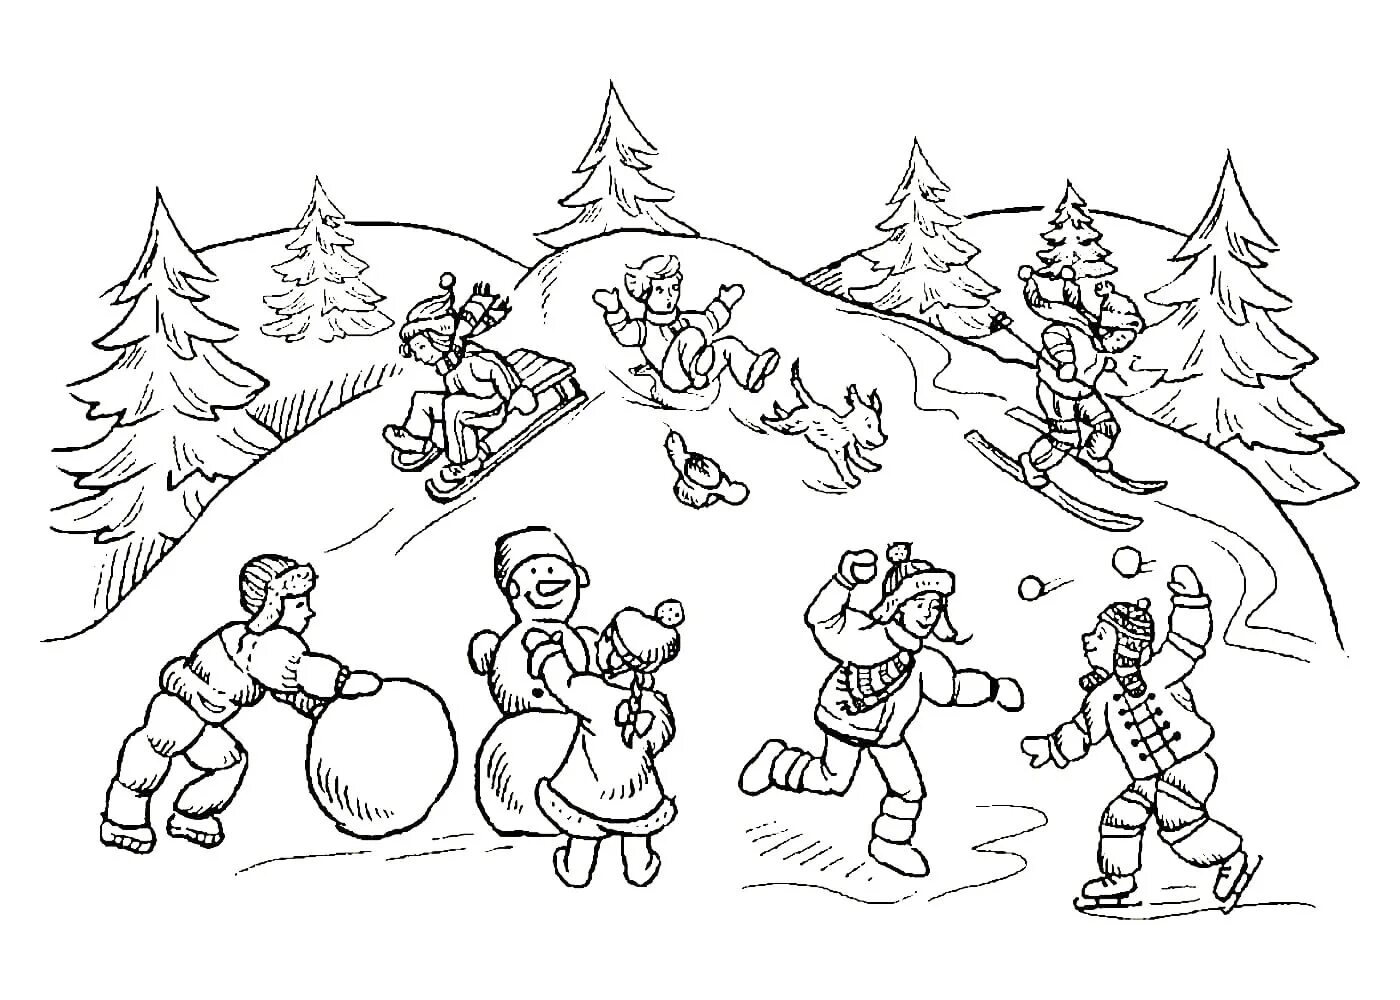 Winter games for kids #10